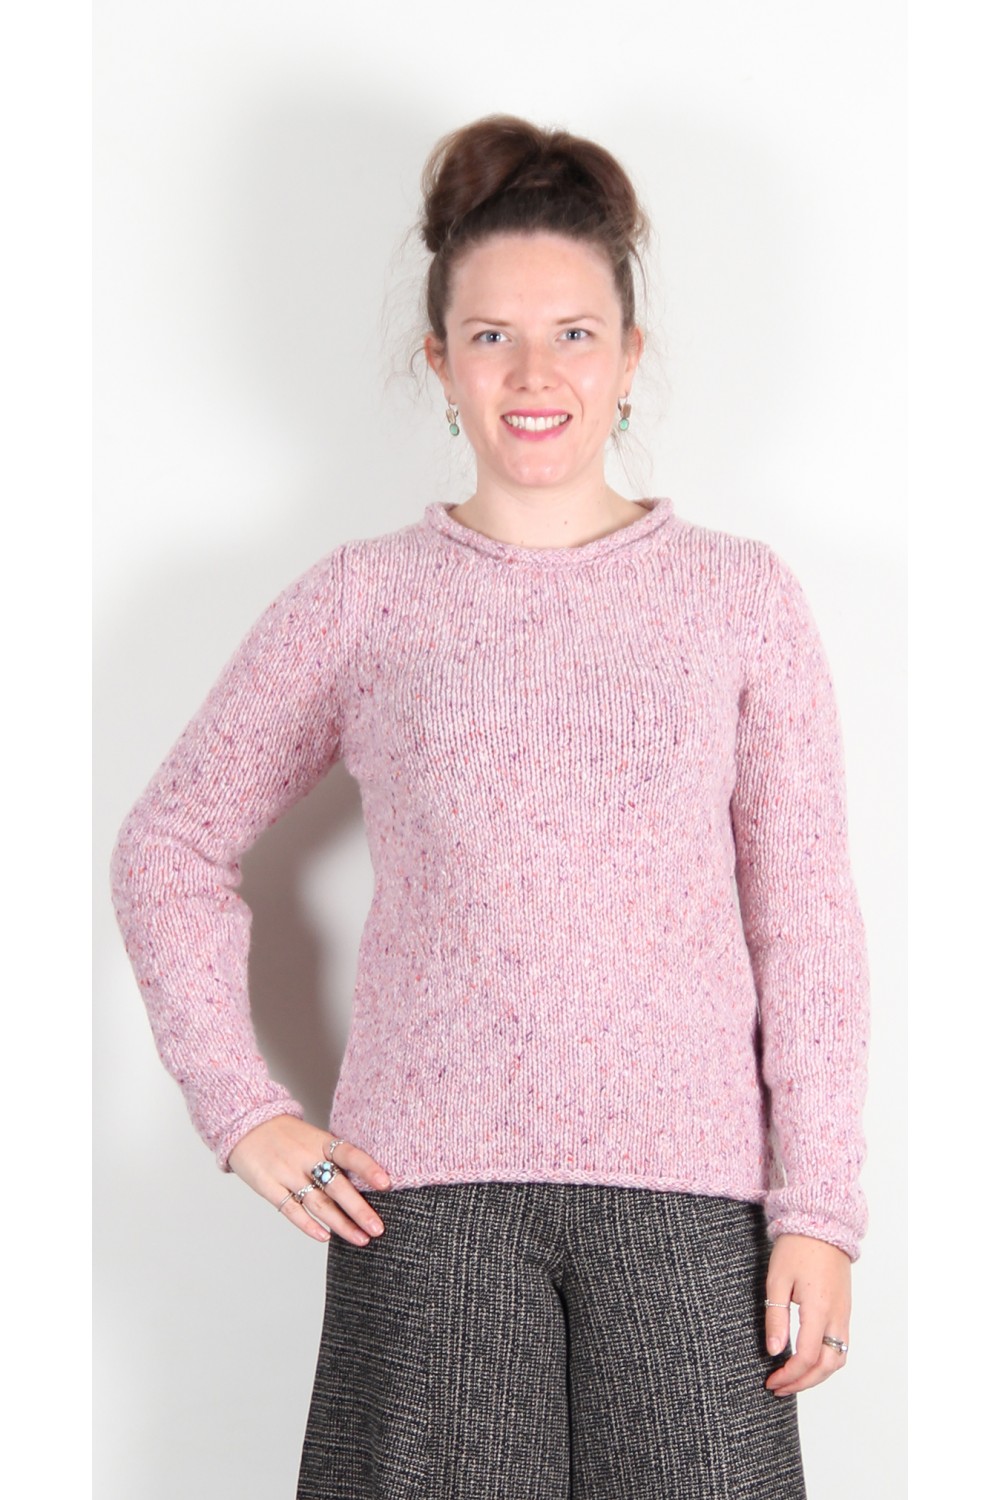 Fisherman Out of Ireland Rolled Edge Knit Wild Rose